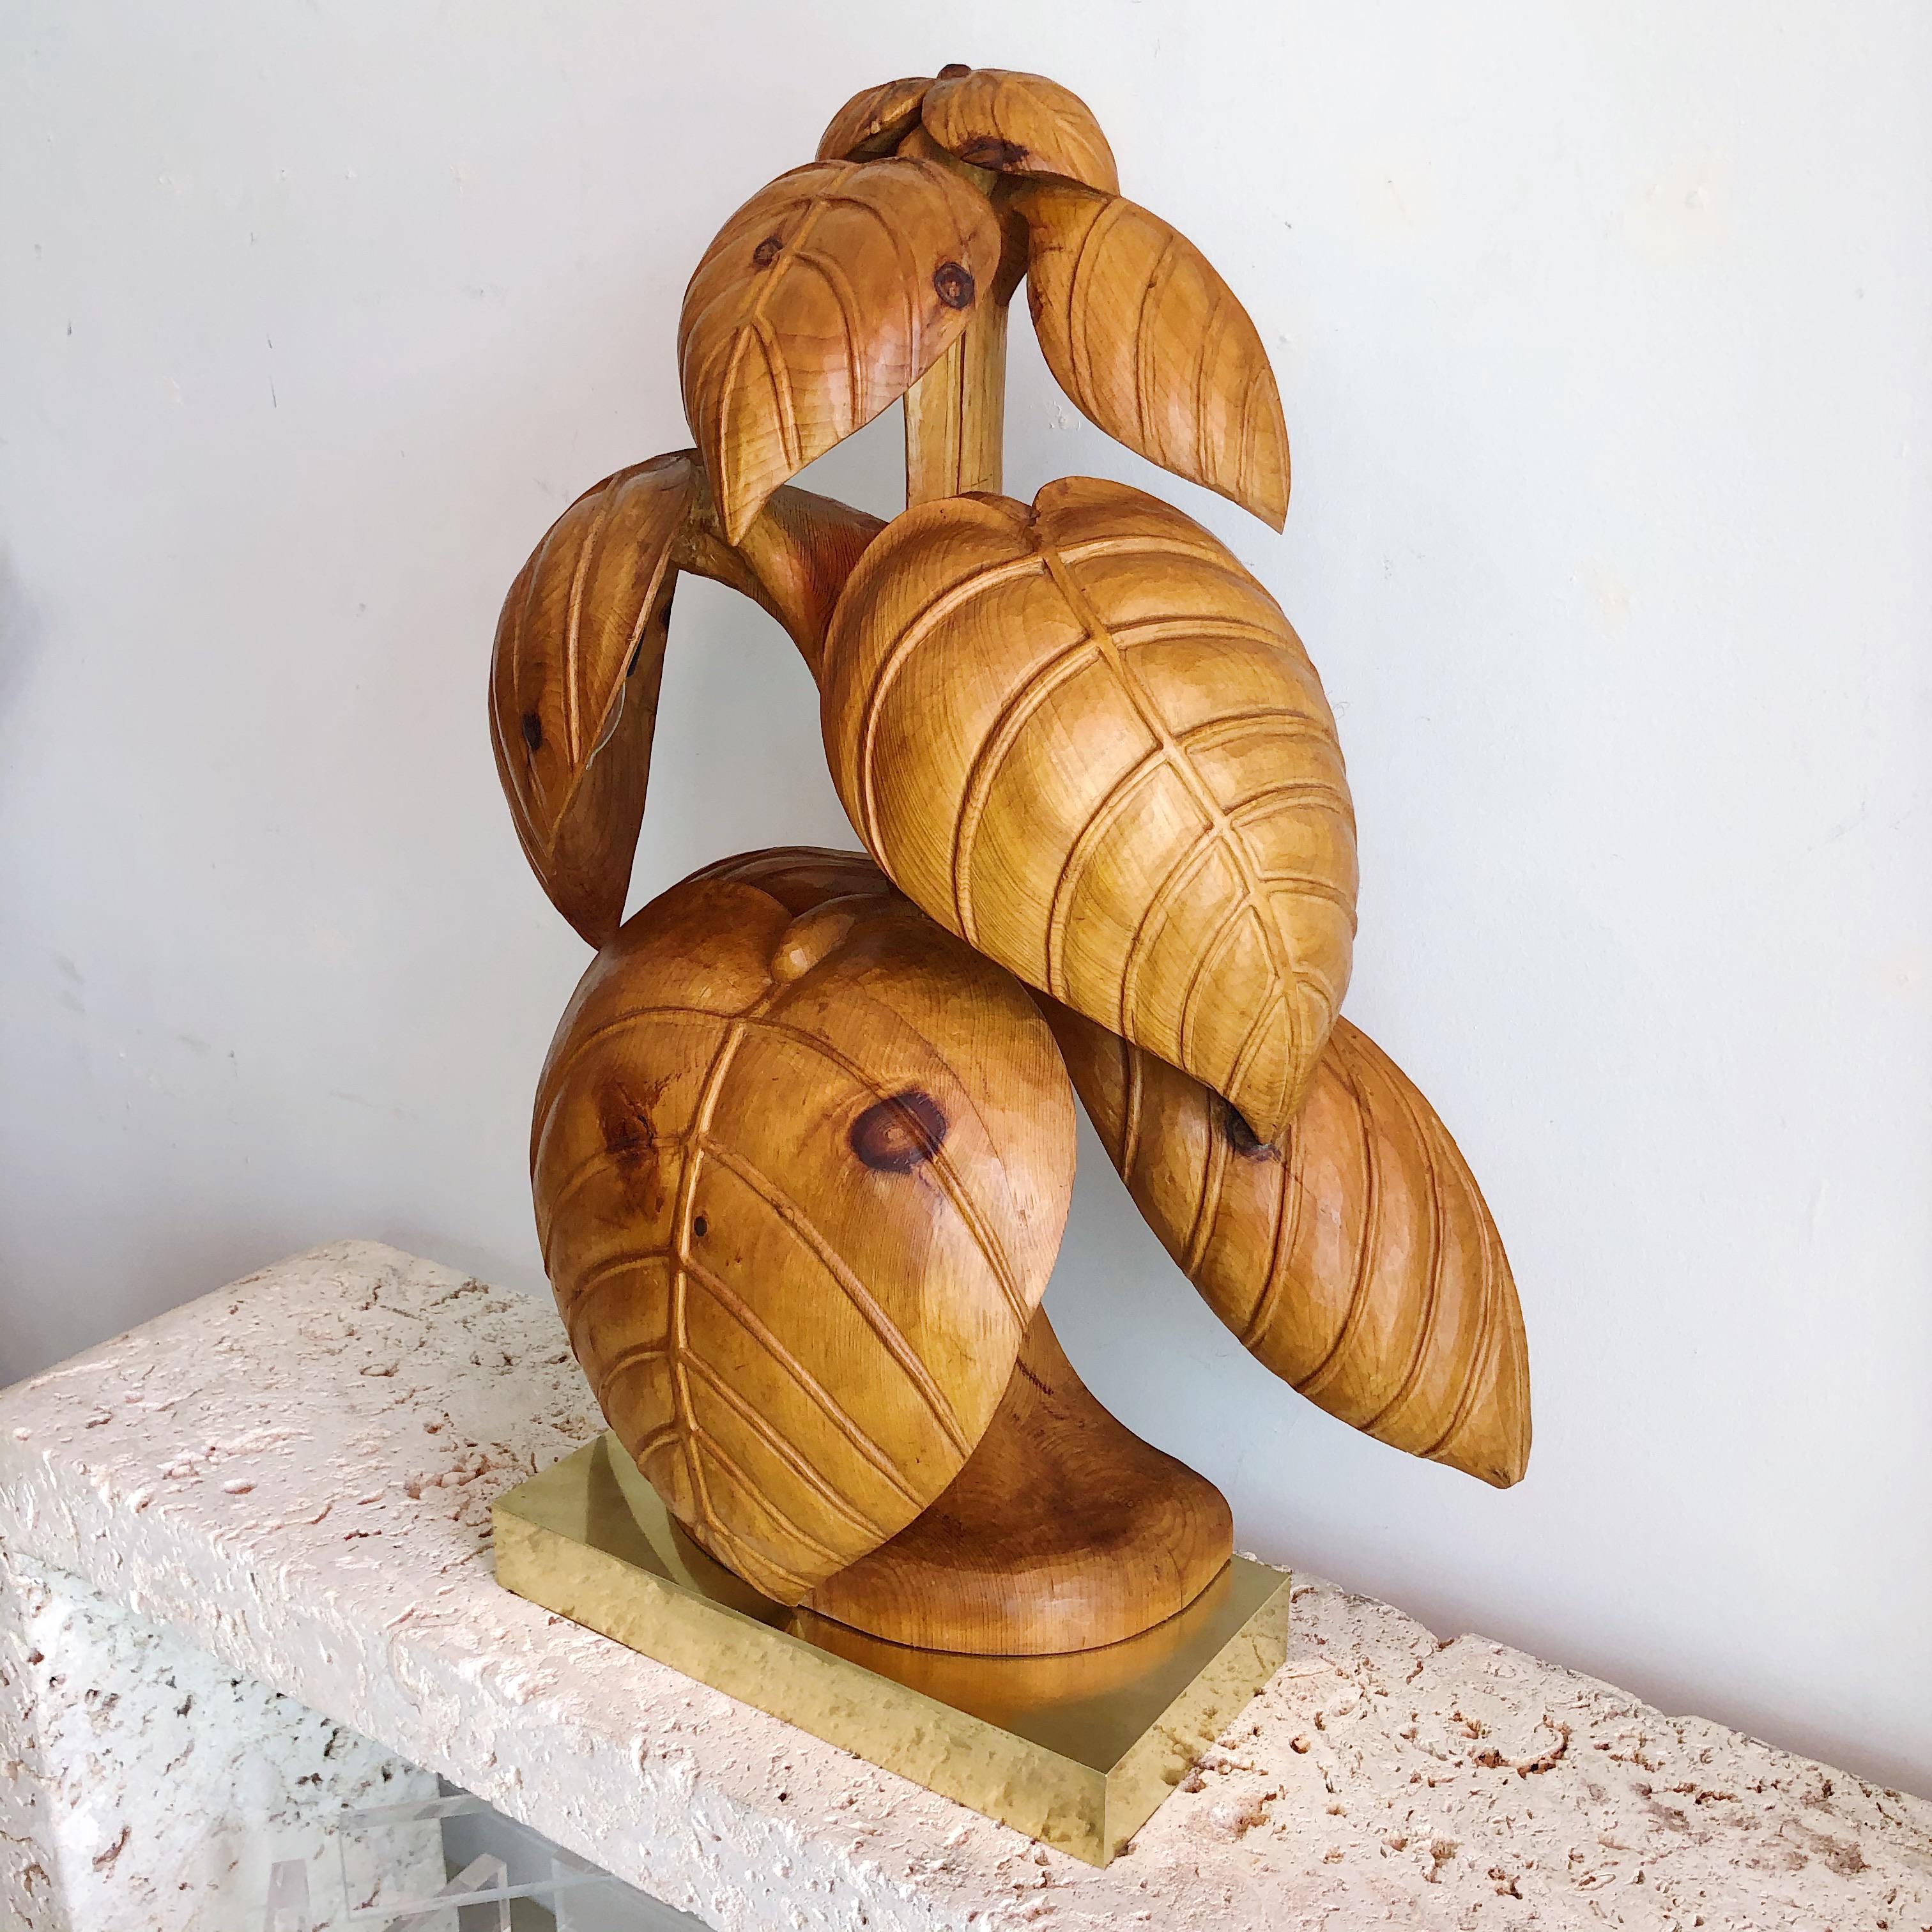 Hand carved wood leaves adorn this extremely rare, large Bartolozzi and Maioli lamp on a bronze base. Italy, 1970s. Original wiring with US plug. Unsigned but verified by Bartolozzi and Maioli.